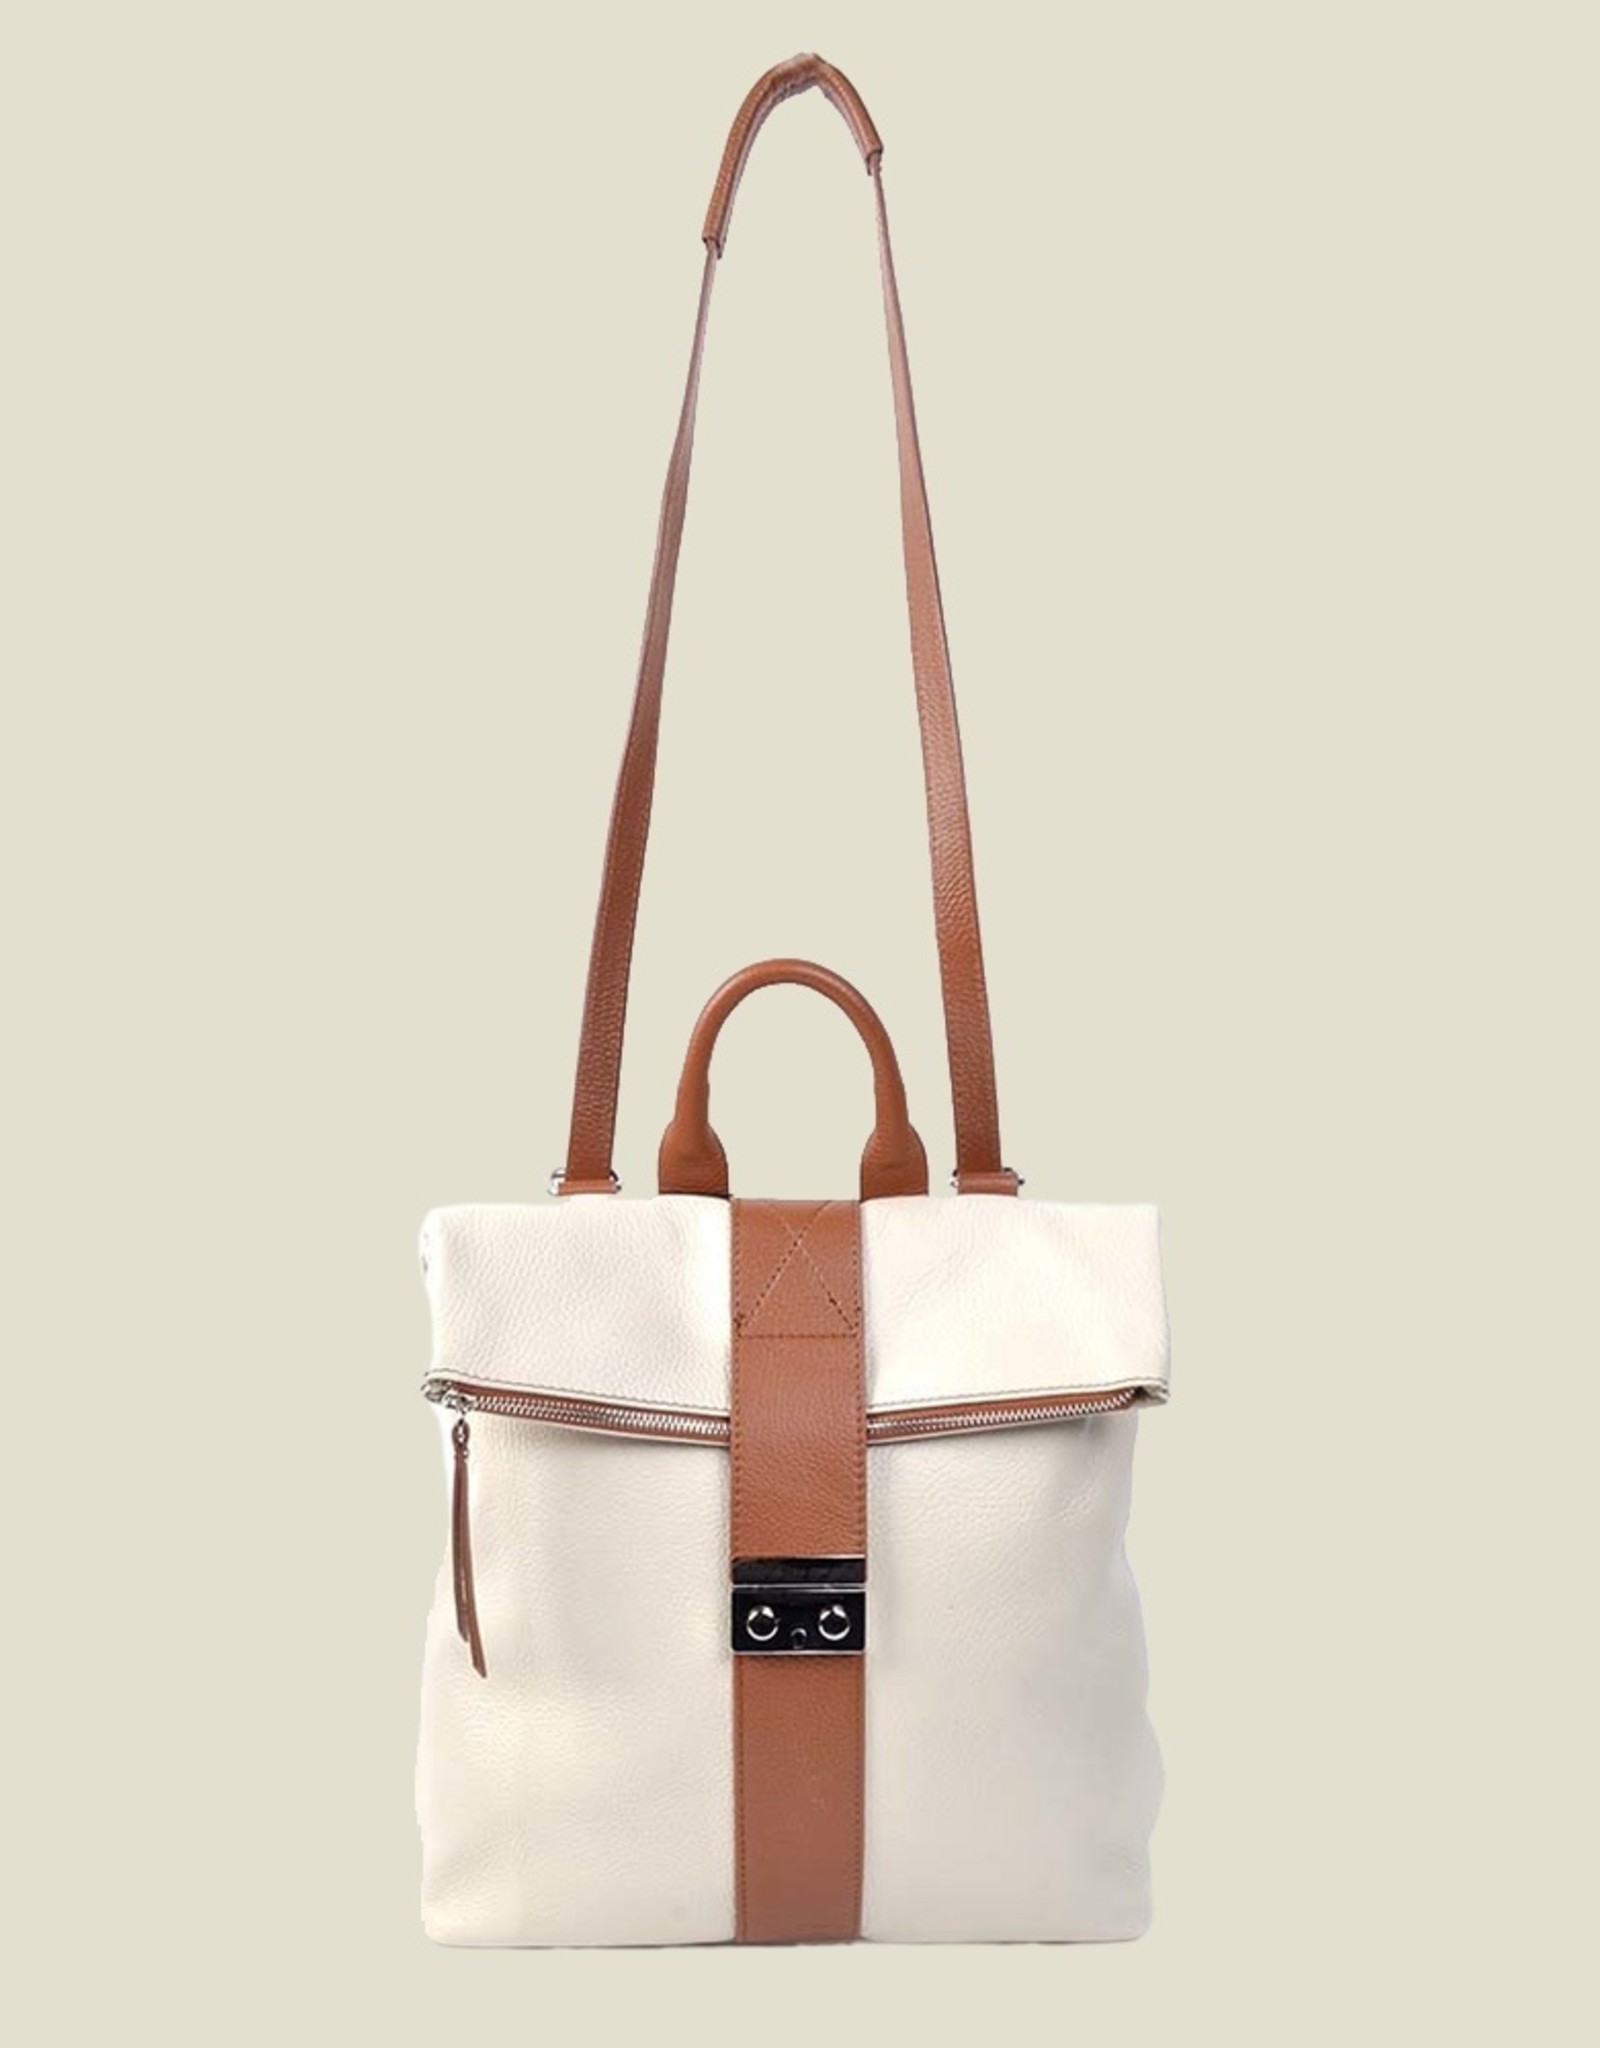 Two in one handbag/backpack in leather, in two colors